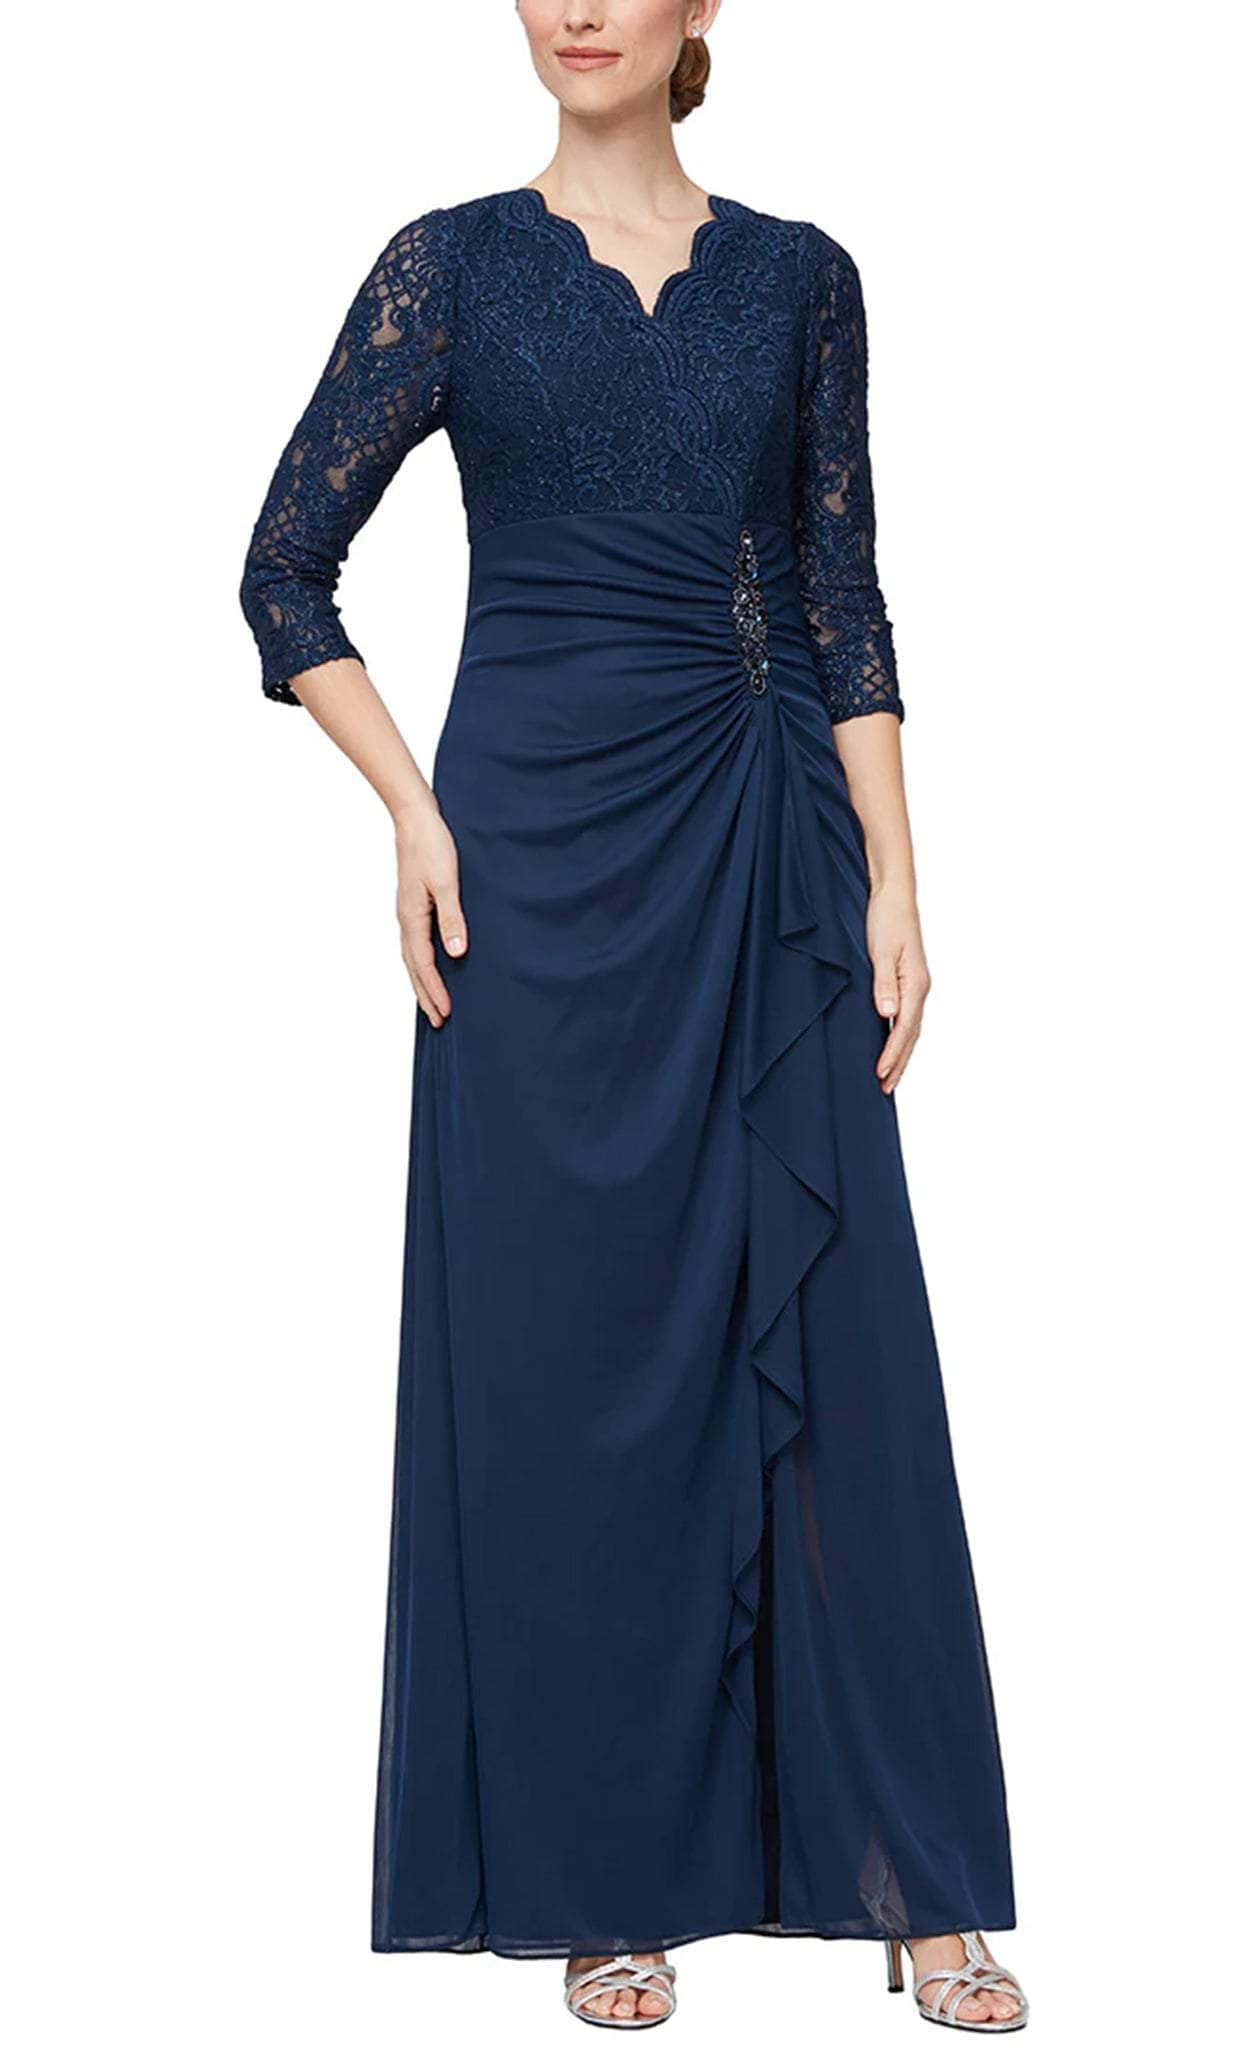 Image of Alex Evenings 82122469 - Formal Lace-Made High Waist Evening Gown